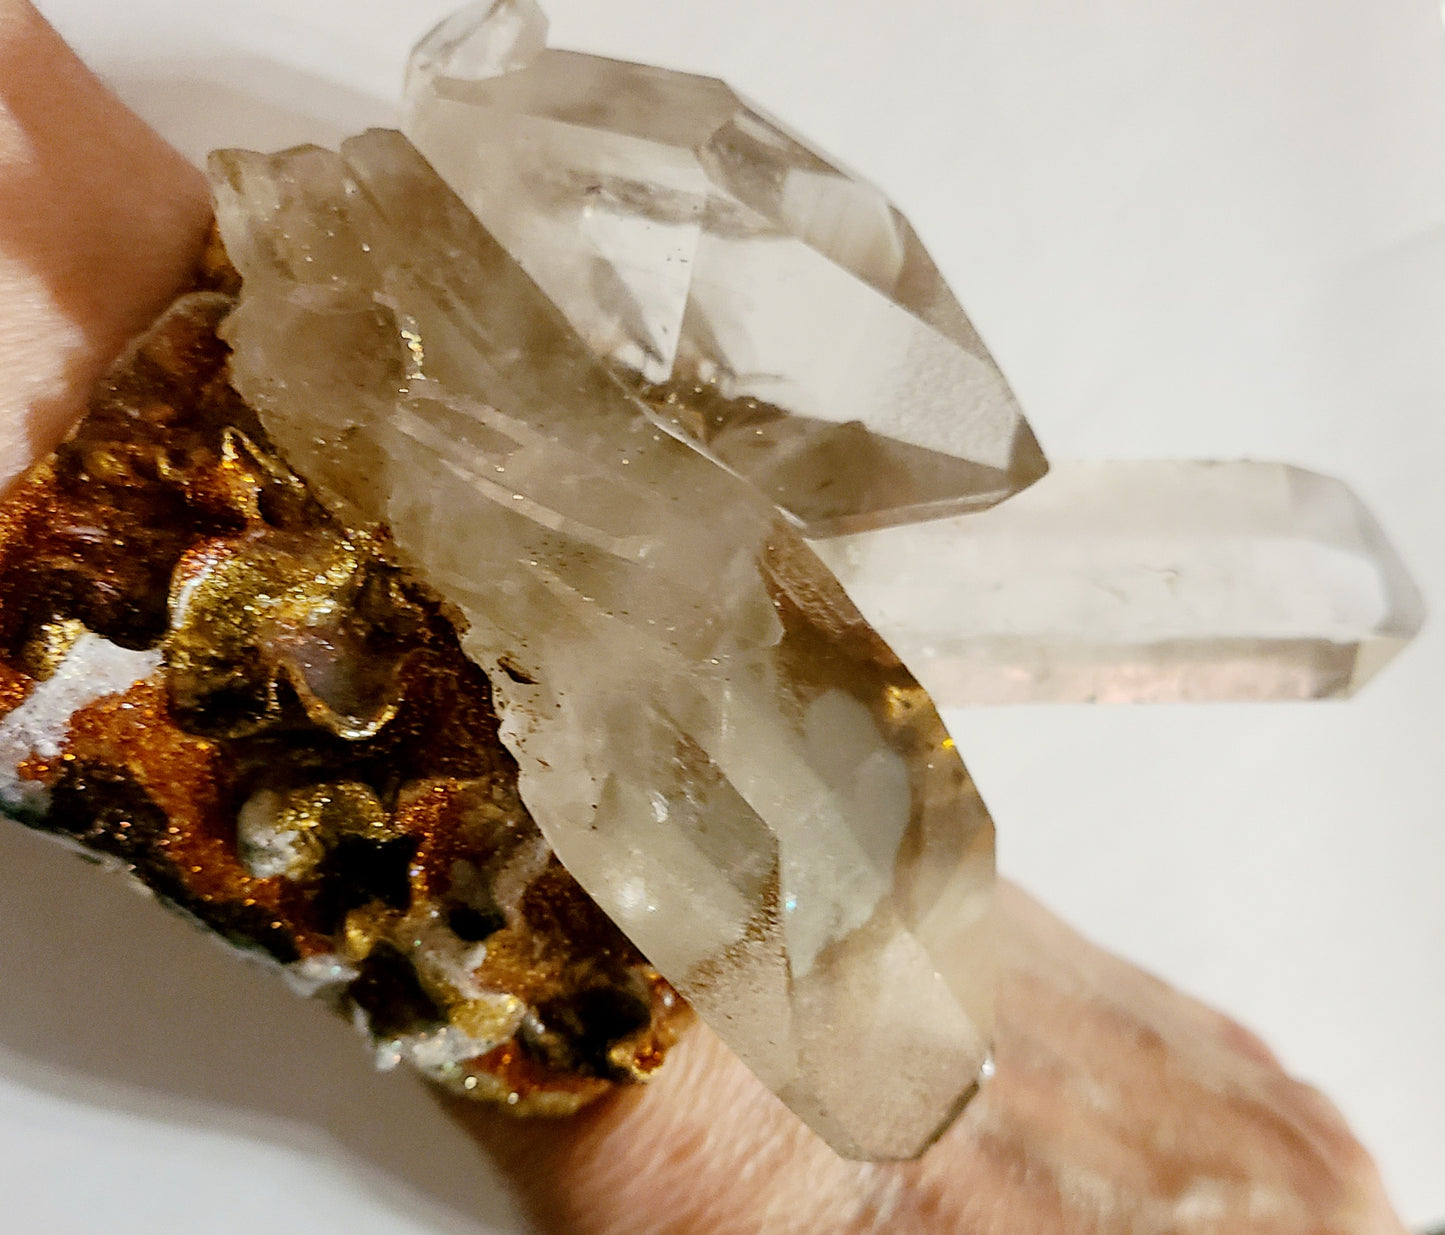 Cuff Statement Sculpted Diamantina Quartz Crystal, Wrist Candy Over the Top, Bangle Haute Couture OOAK